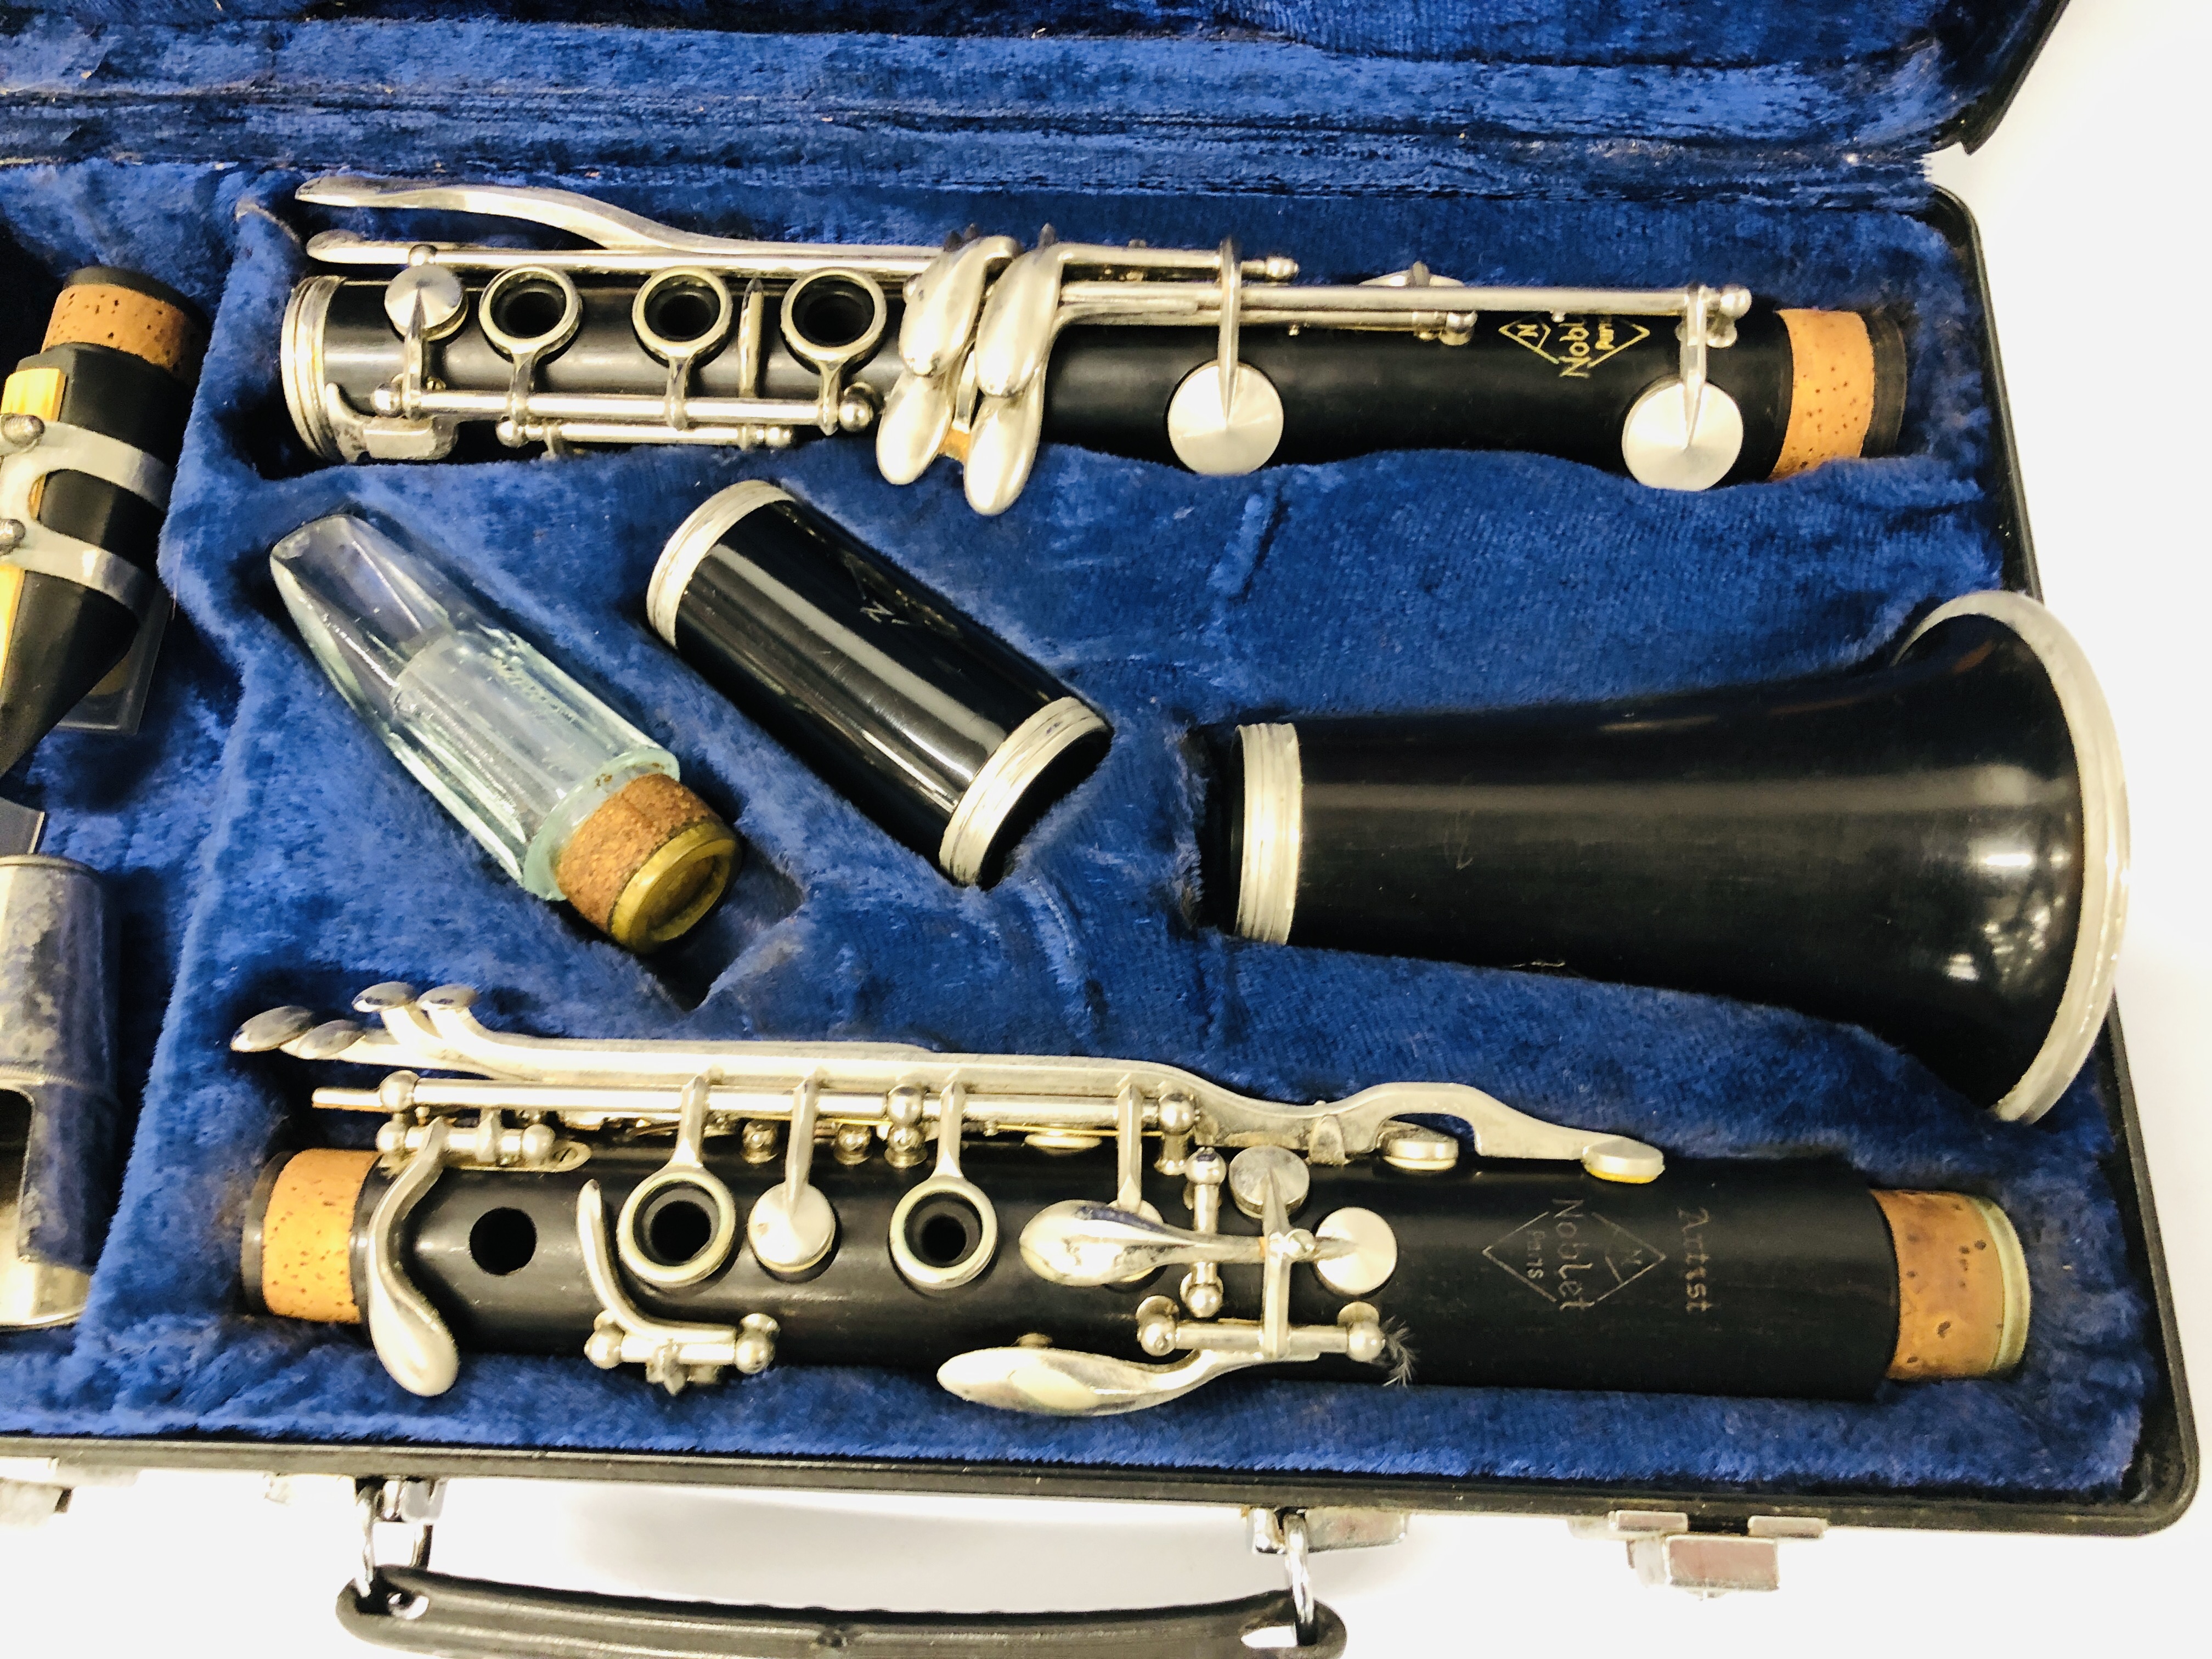 NOBLET CLARINET IN FITTED CASE - Image 2 of 6